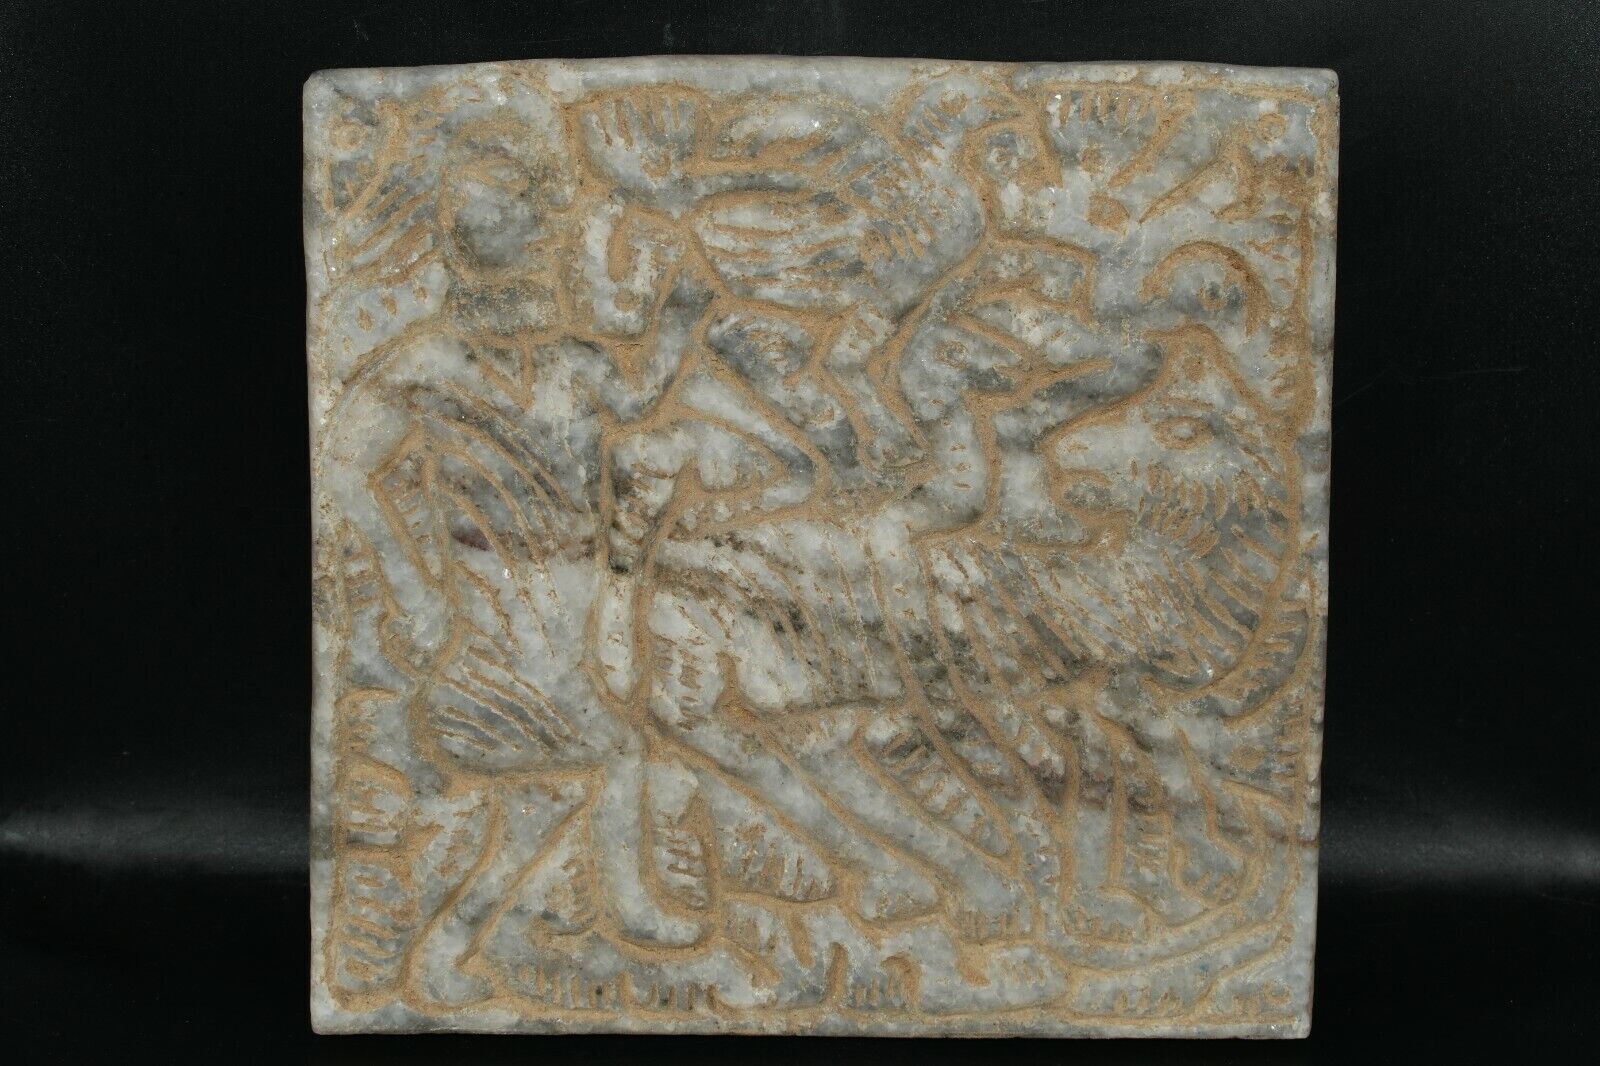 Old Sassanid Near Eastern Marble Stone Relief Tile with Openwork Engravings